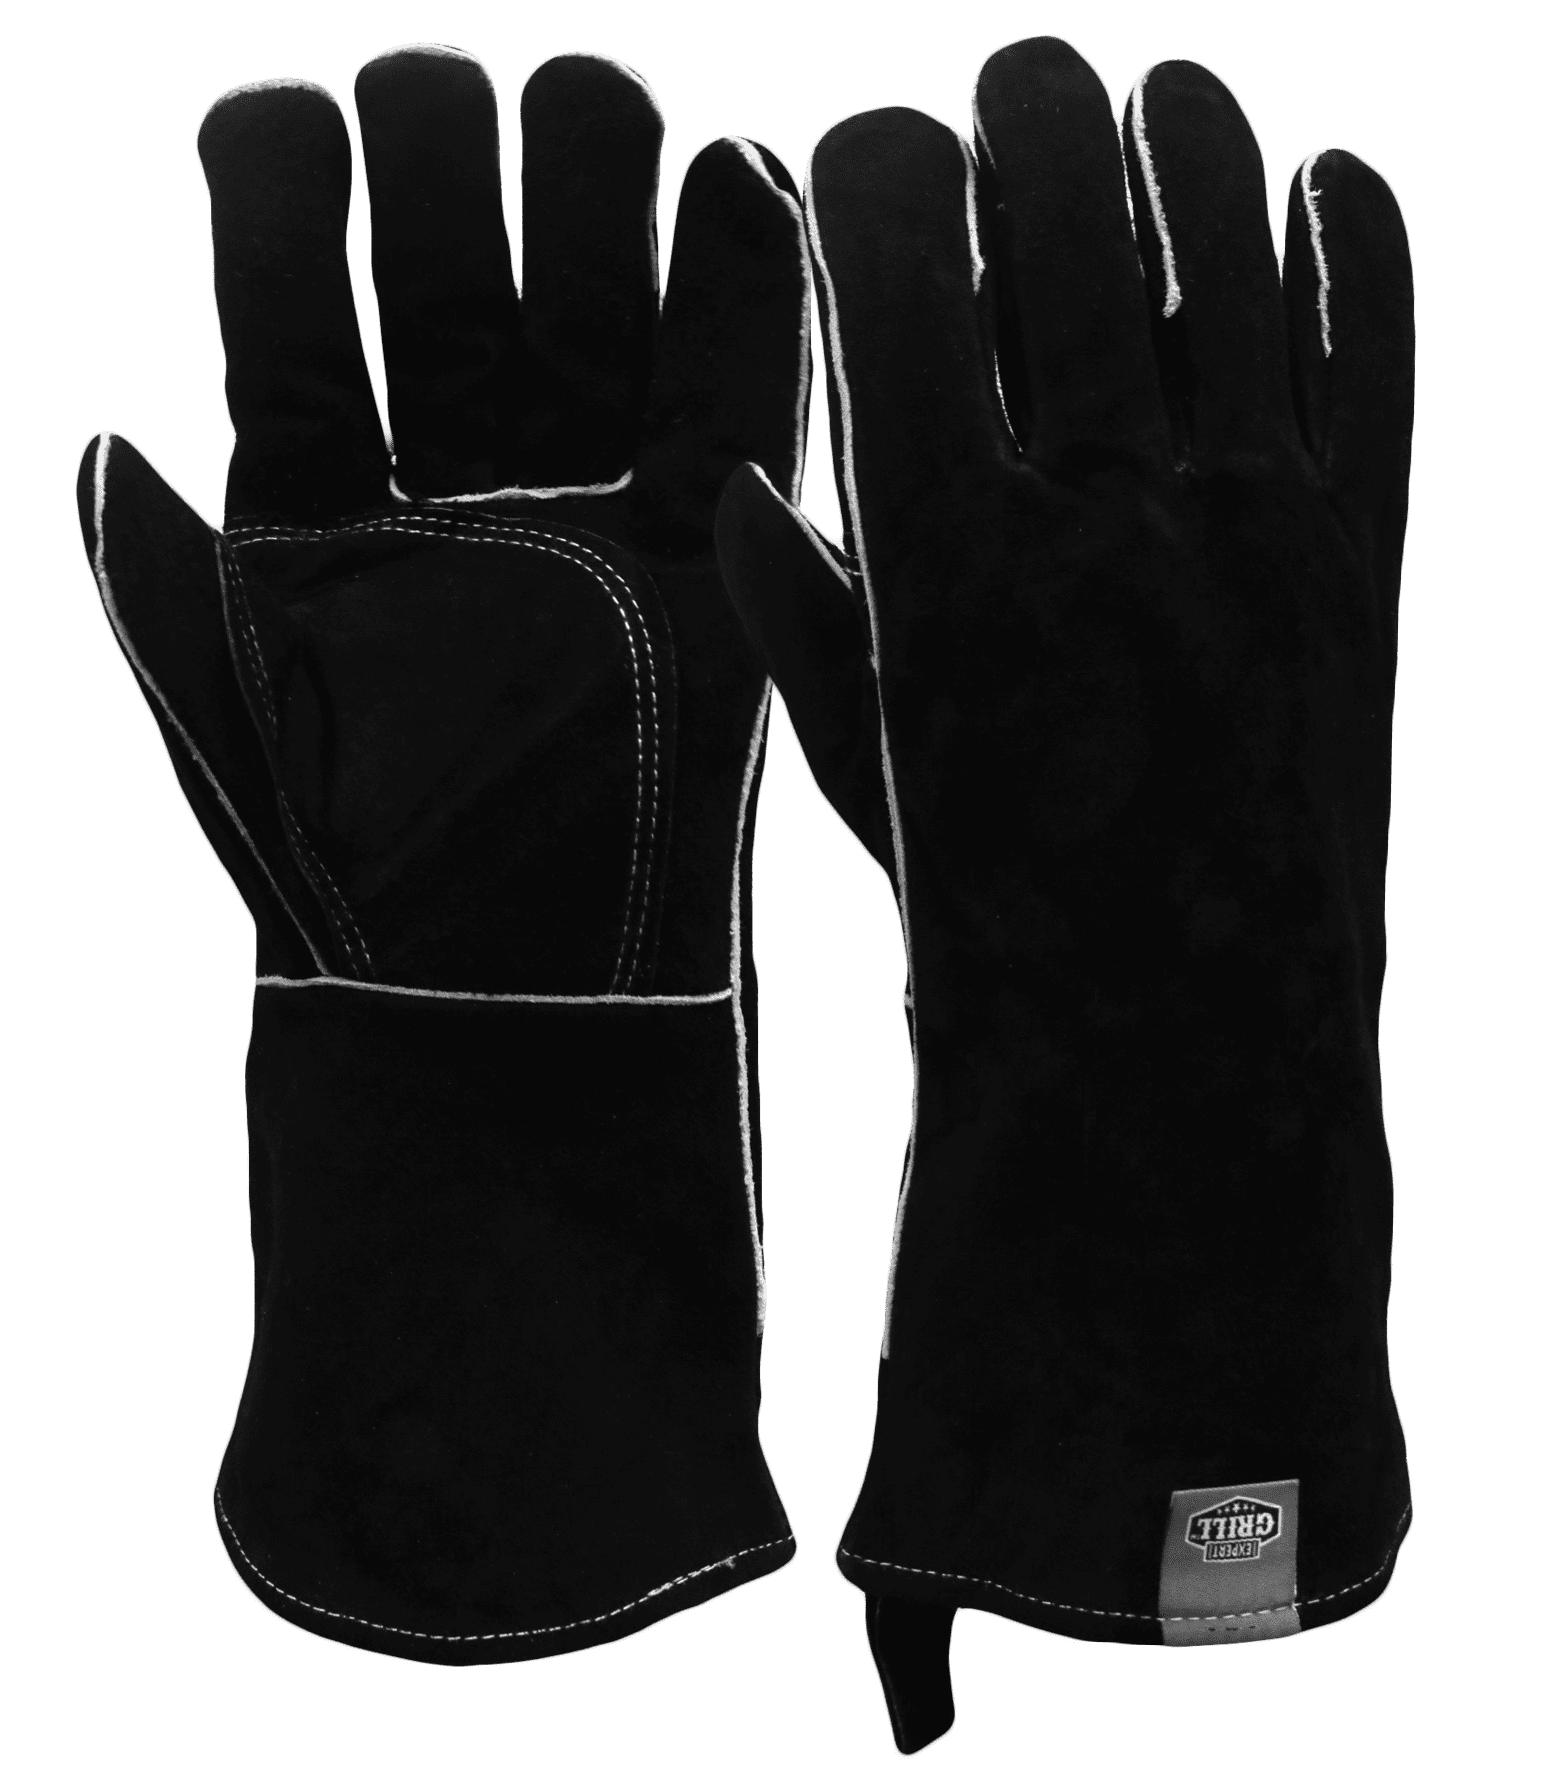 14" Cow Split Leather Welding Gloves Anti-Abrasion & Heat Work Gloves 5 Colors 